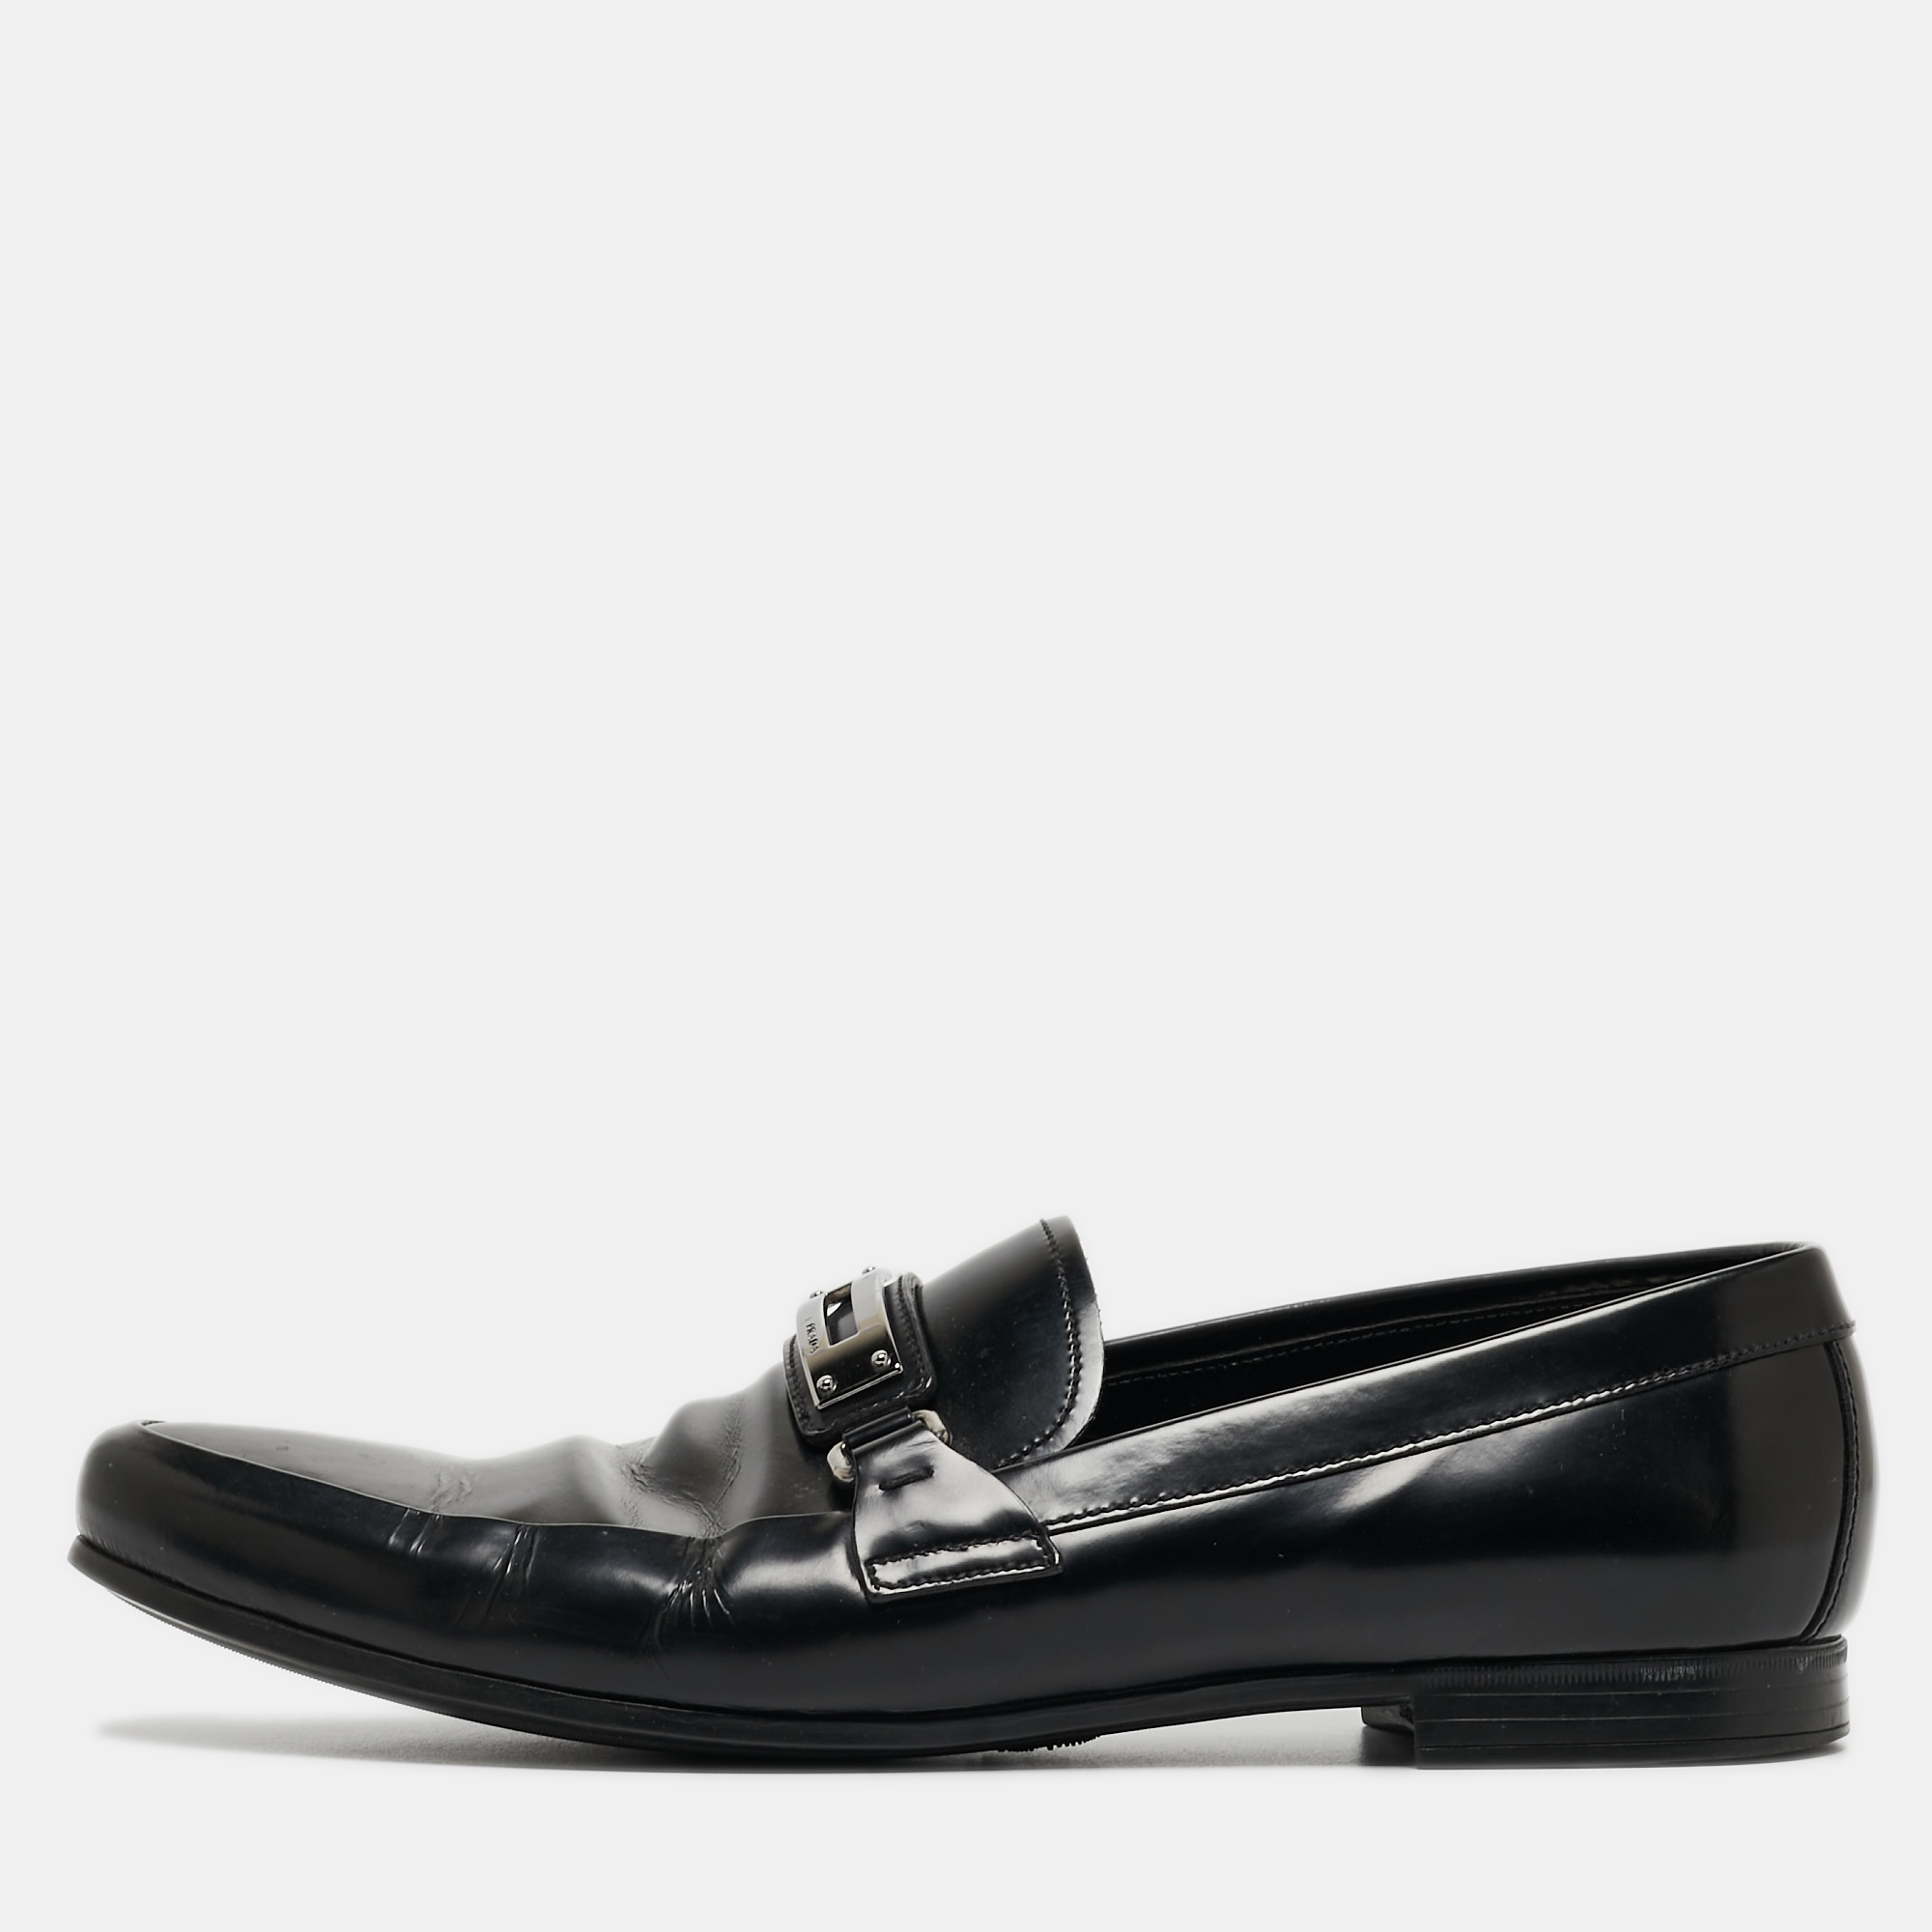 Pre-owned Prada Black Patent Leather Buckle Detail Loafers Size 42.5